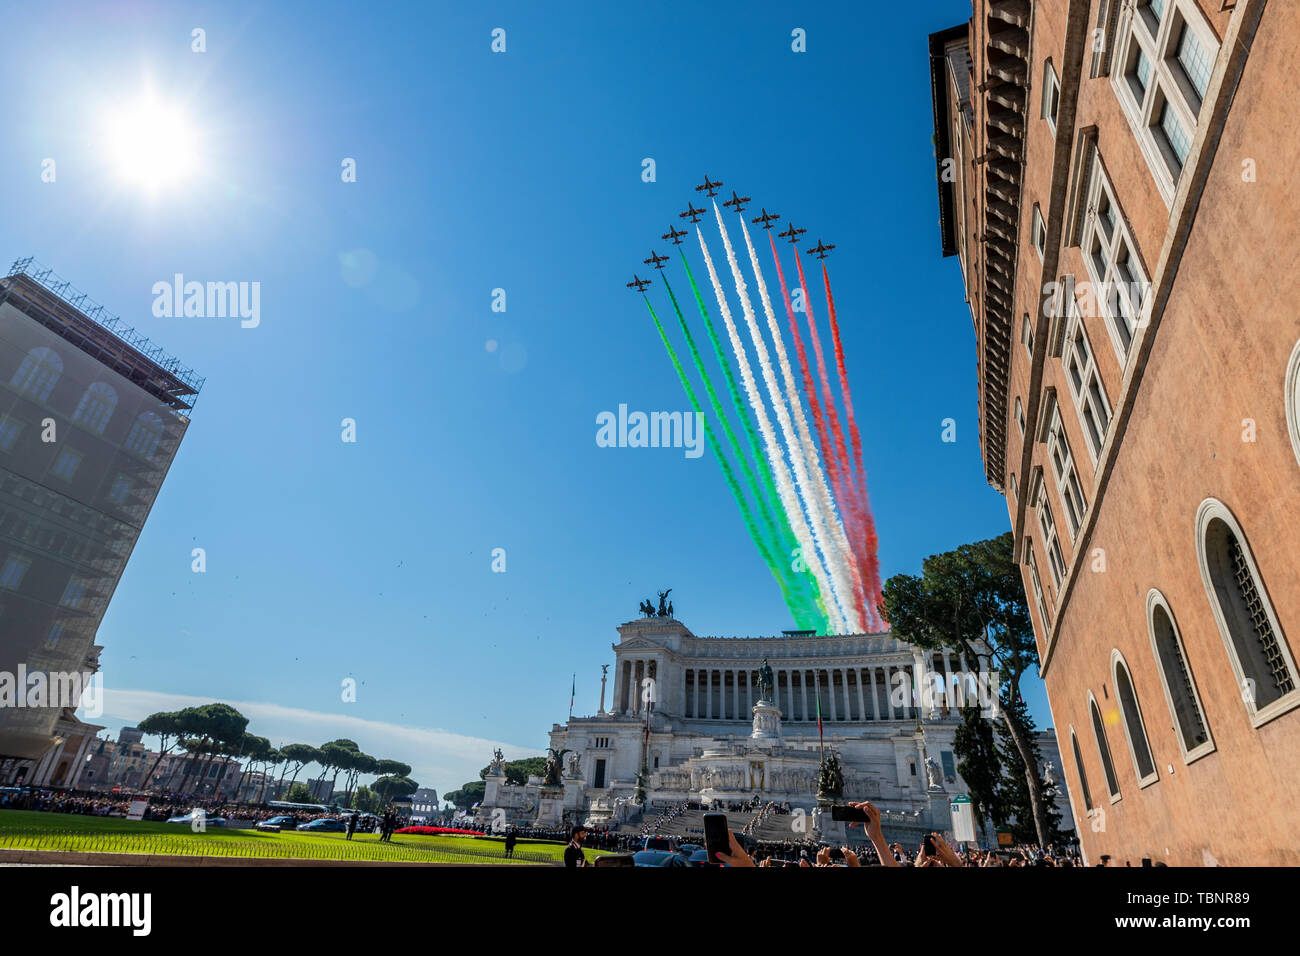 Rome, Italy - June 2, 2019: Italian acrobatic aerial team 'Frecce Tricolore' flying over Altar of the Fatherland at Republic Day in Rome, Italy Stock Photo